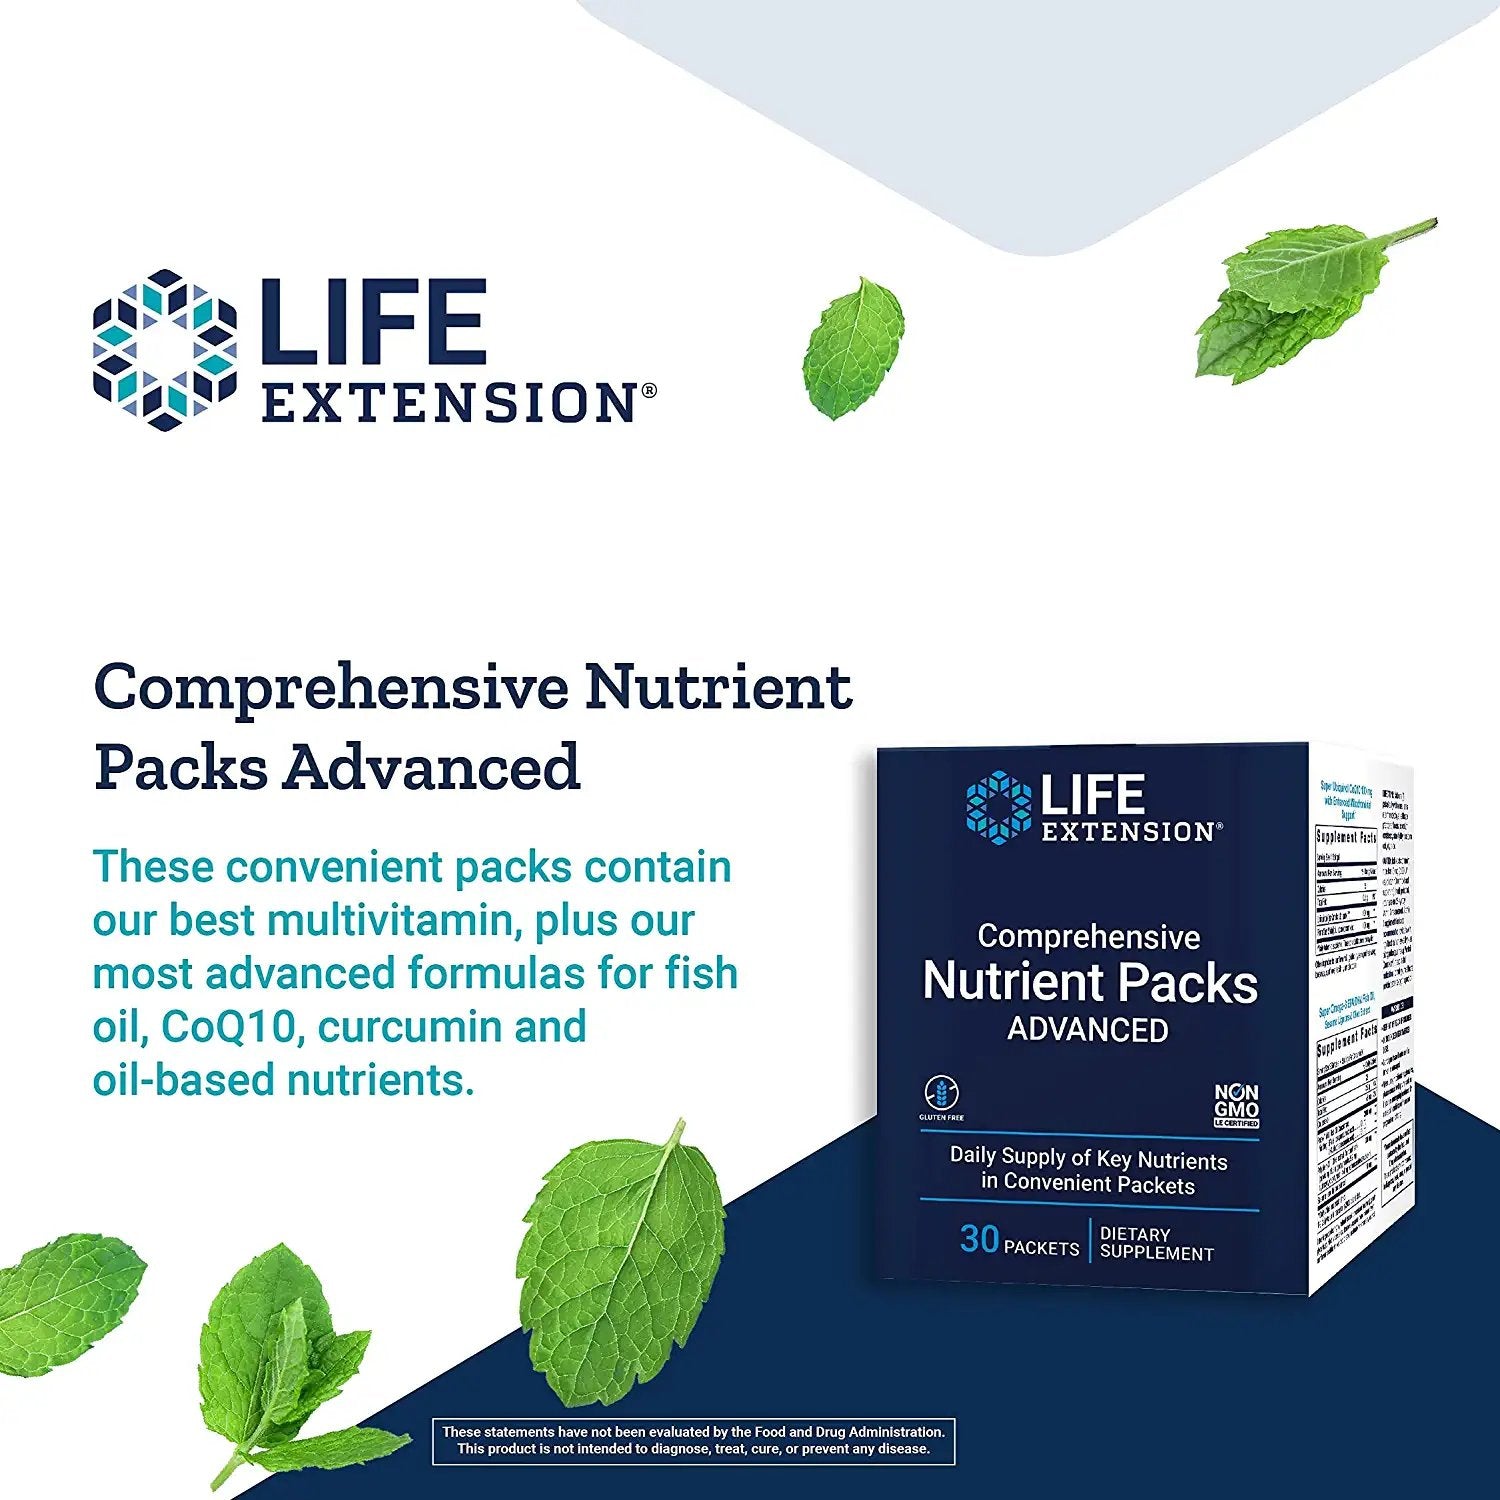 Life Extension Comprehensive Nutrient Packs Advanced - Oil-based Nutrients - Multivitamin & Minerals Supplements with Omega-3, CoQ10 For Health And Longevity – Gluten Free, Non-GMO - 30 Packets